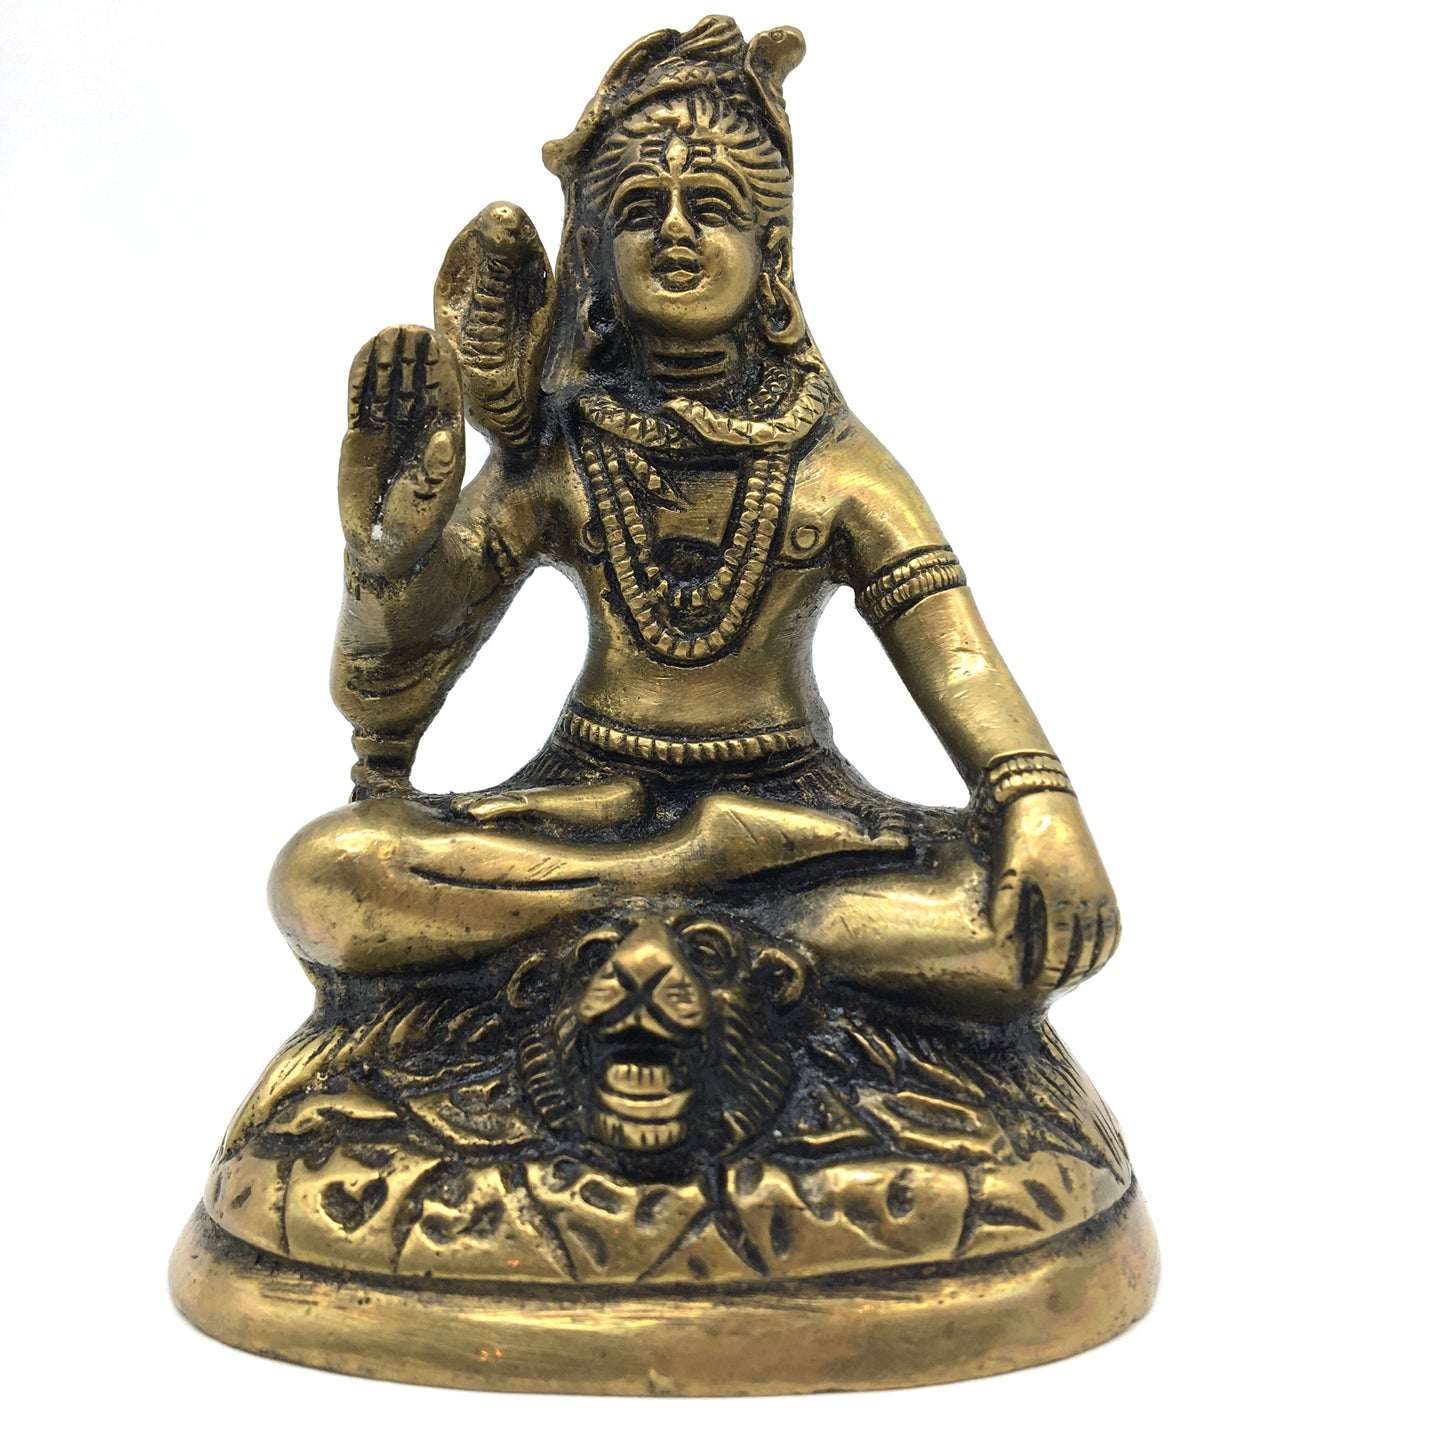 Solid Brass India God Lord Shiva Siva in Meditation Statue 4" Handcrafted